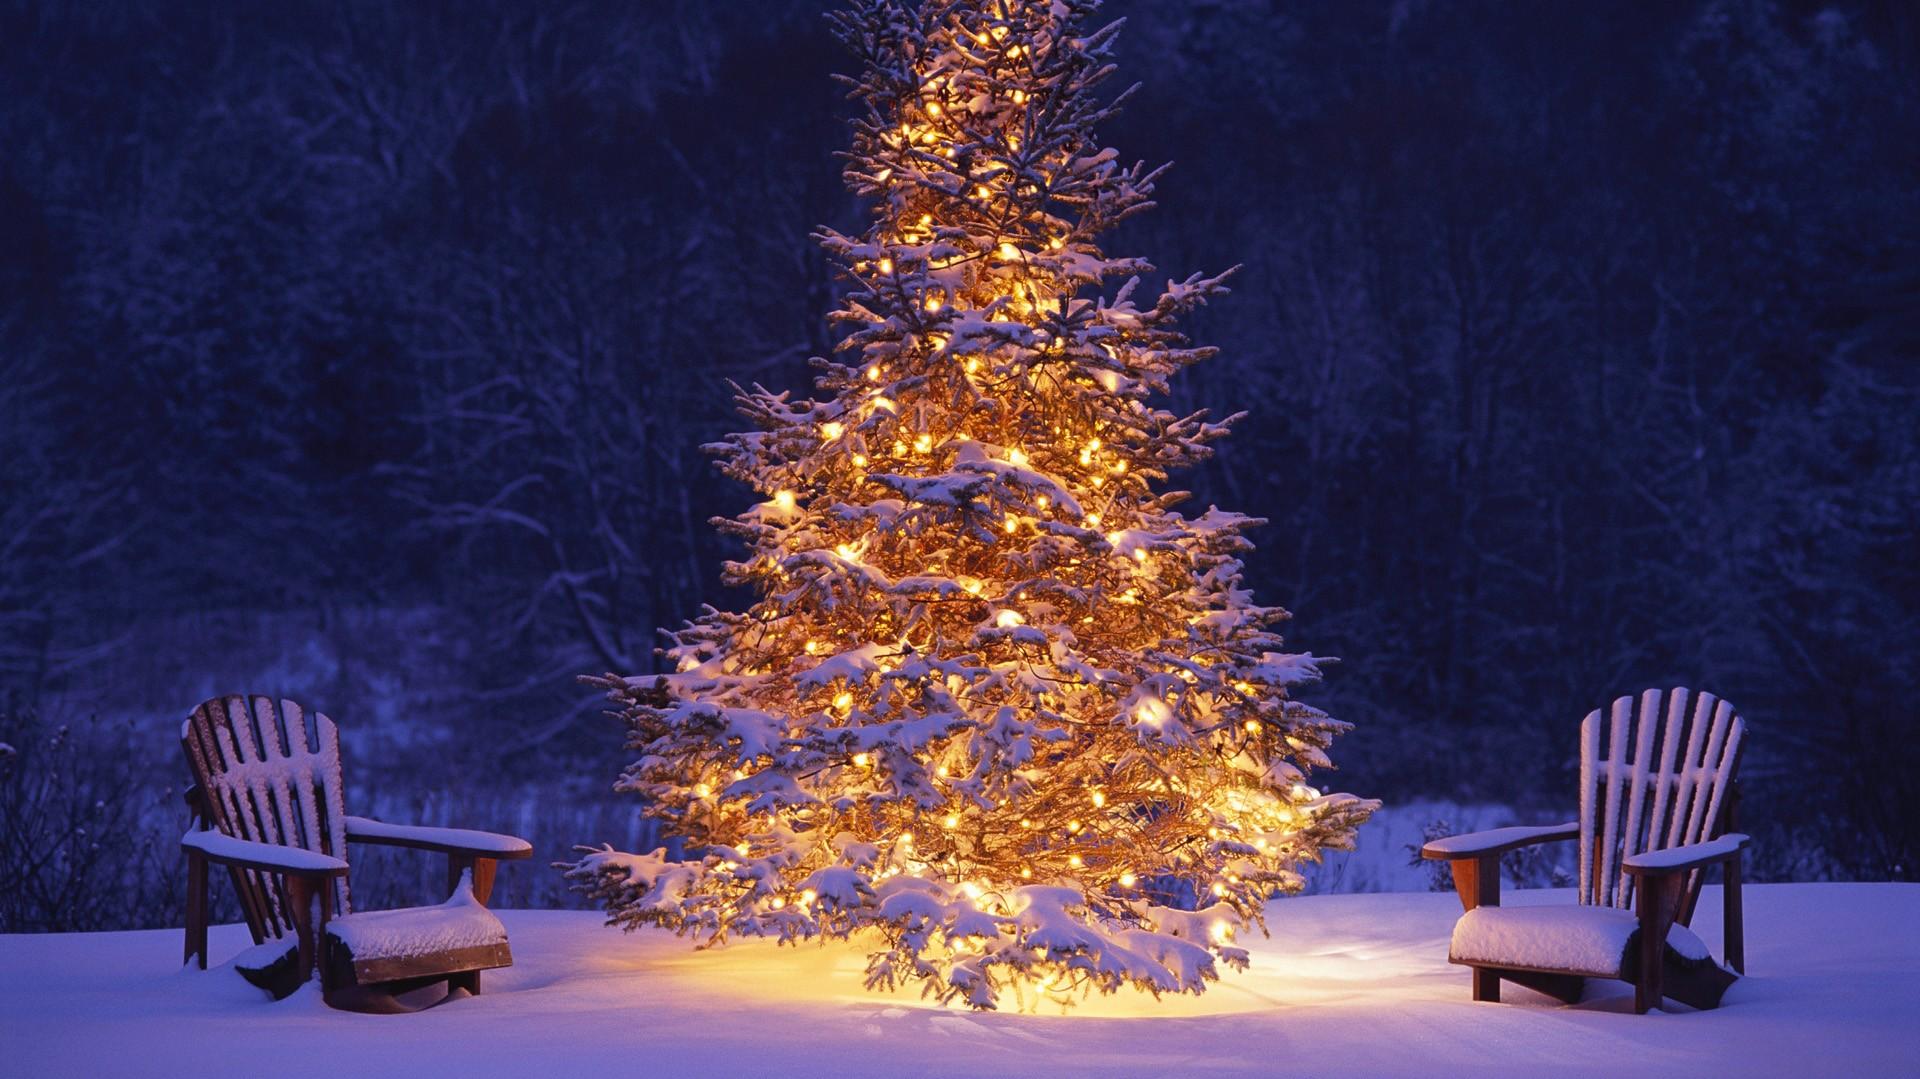 Free download Outdoor Christmas Tree Wallpaper In Winter photos of